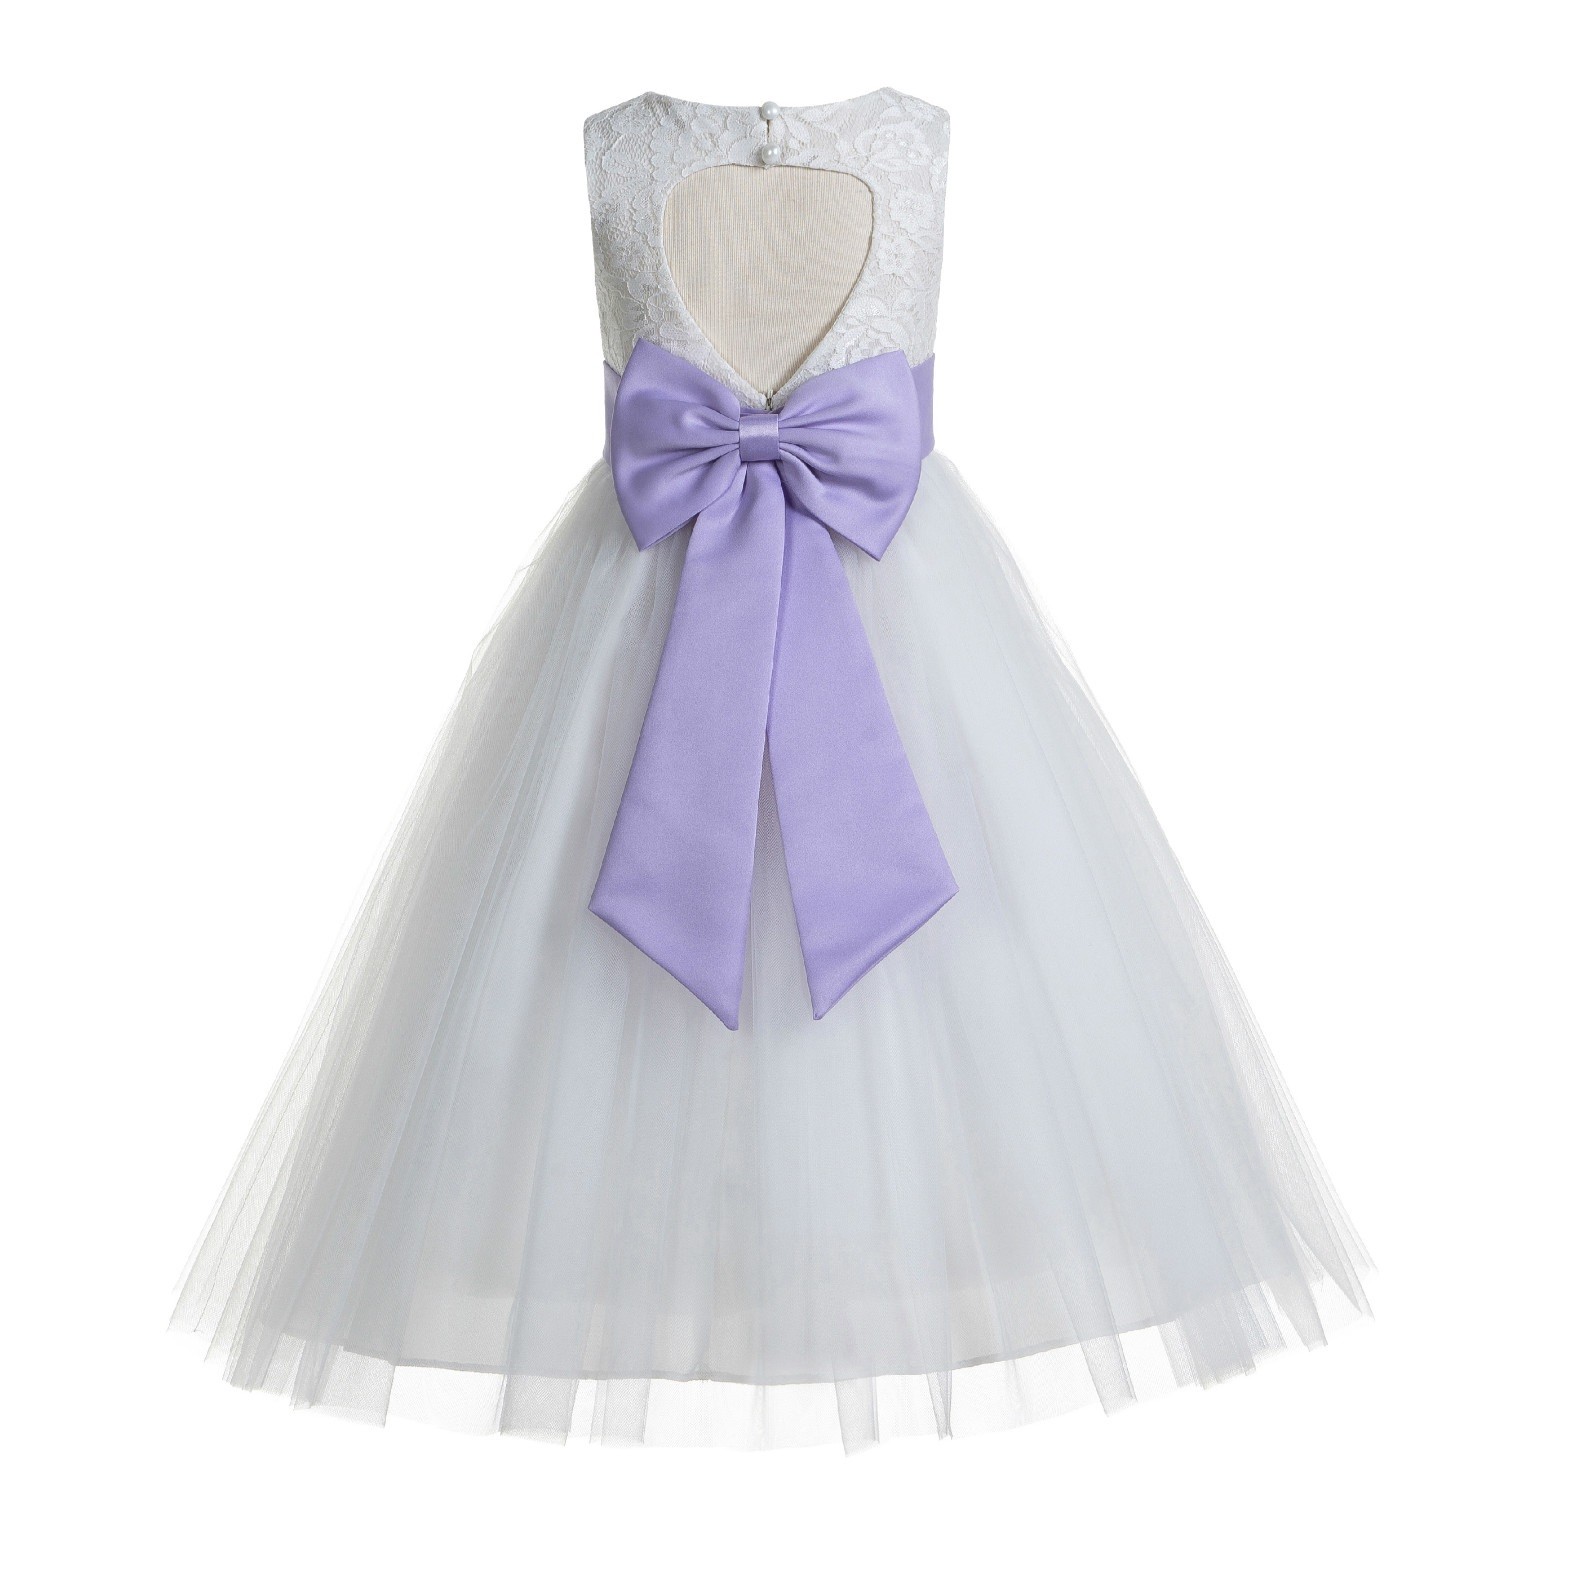 Ivory / Lilac Floral Lace Heart Cutout Flower Girl Dress with Flower 172T